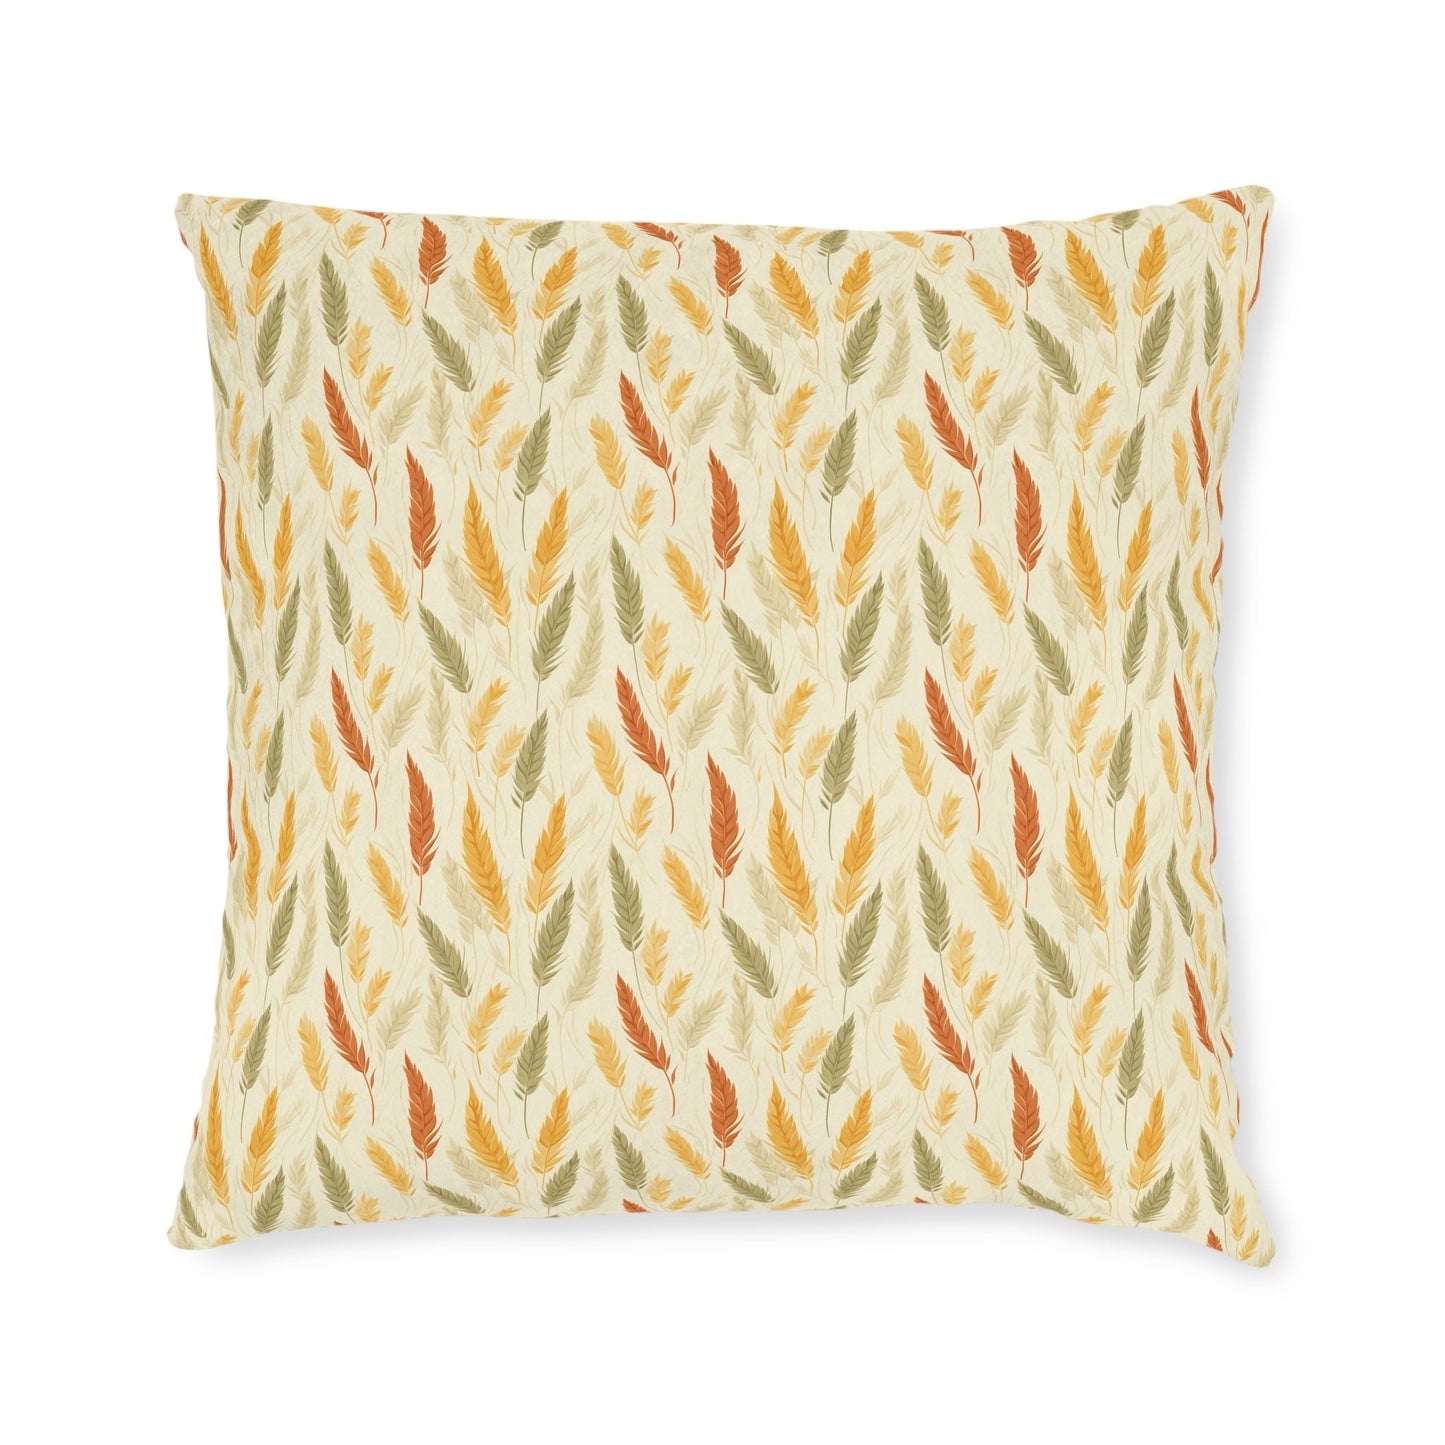 Feather-Woven Wheat Fields: A Naturecore Vision - Square Pillow - Pattern Symphony